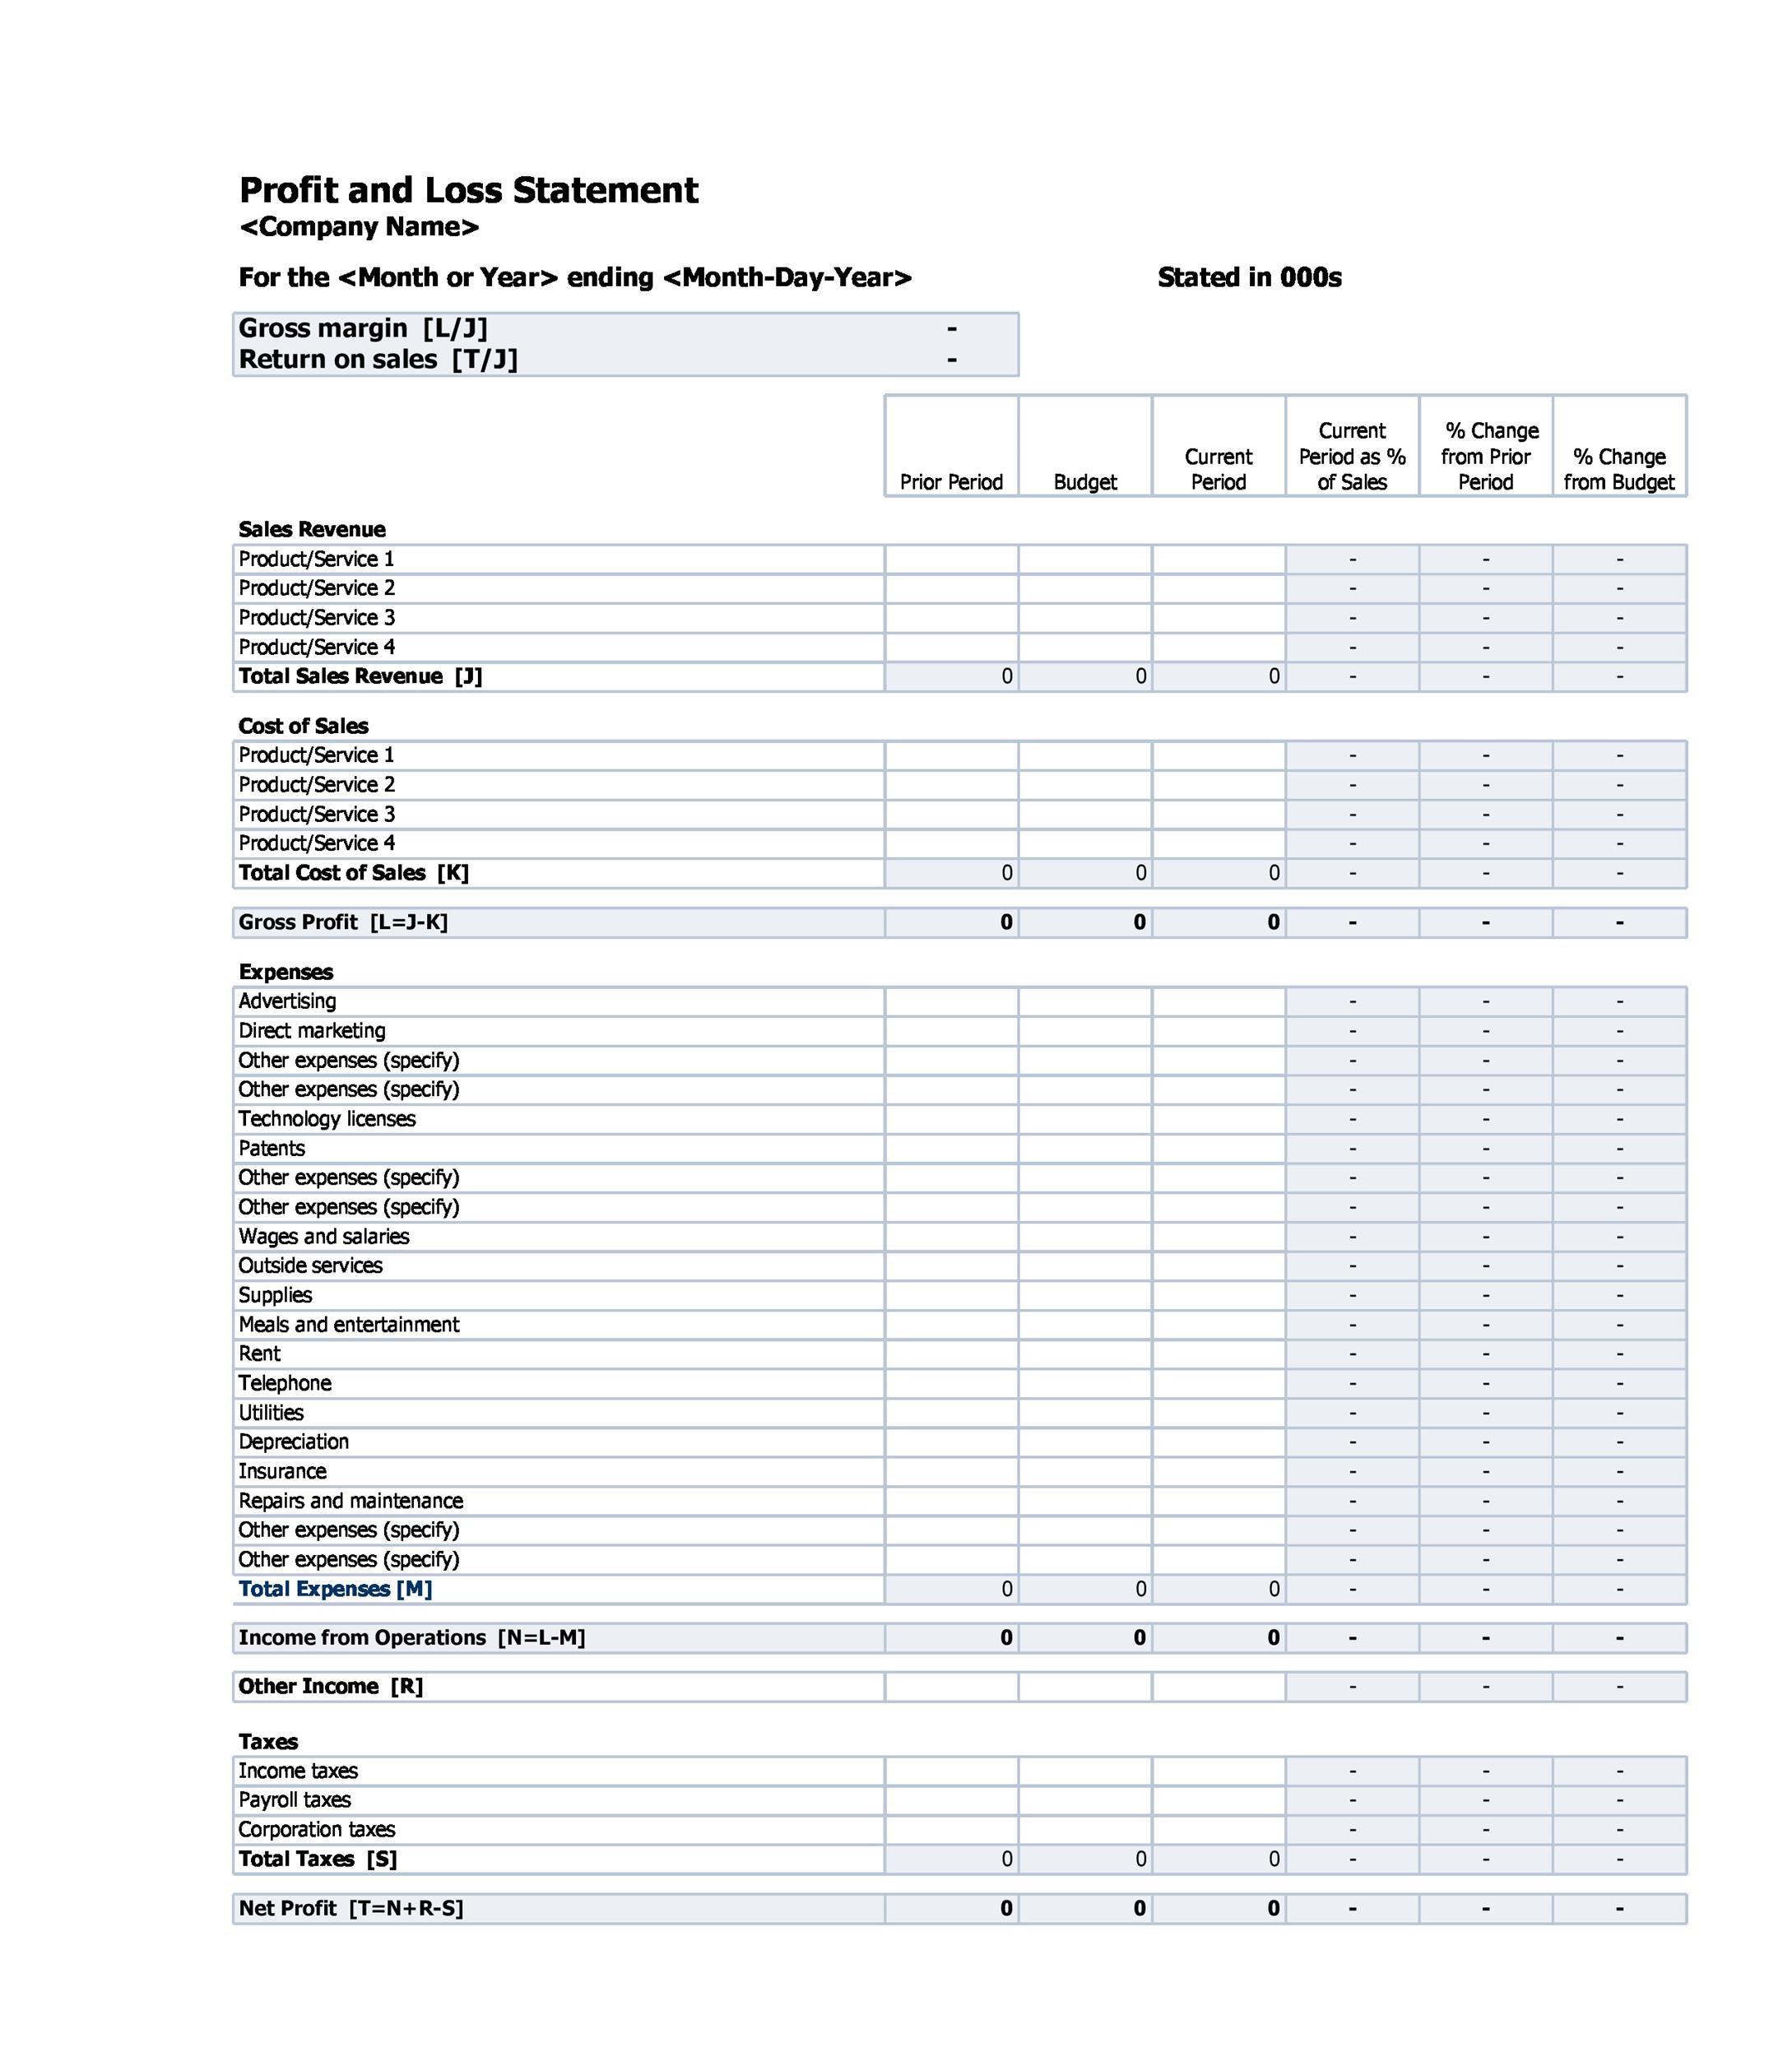 Profit And Loss Statement Templates Forms 8774 HotPicture